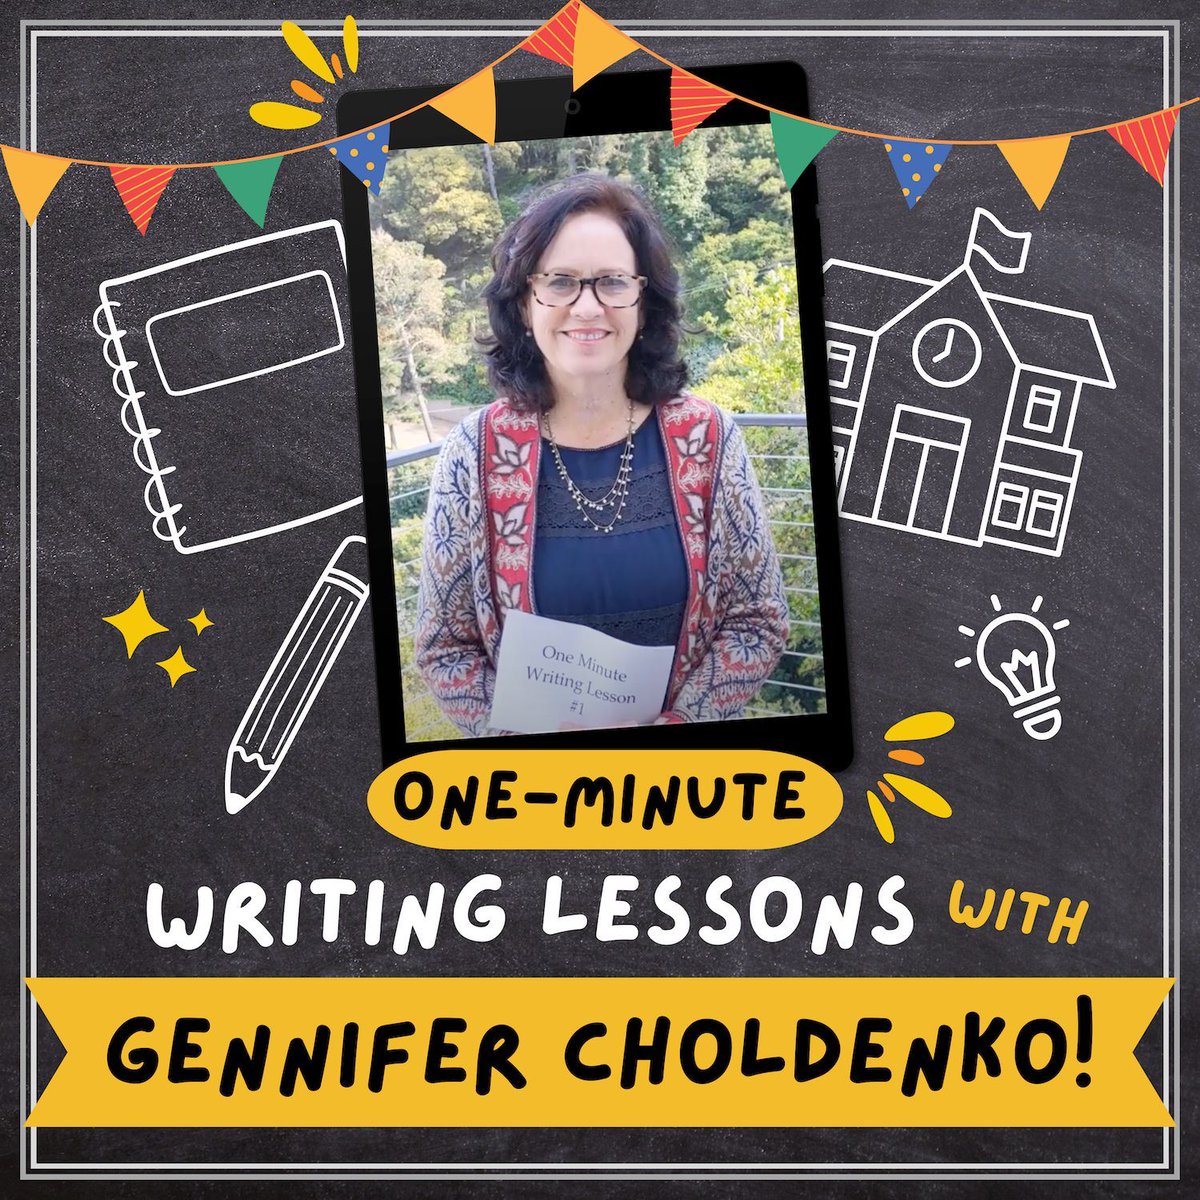 Teachers, I have a challenge for your young writers: one-minute writing lessons! ✍️ These videos are a quick, fun way to sharpen writing skills for ages 8-13. What will your young authors create? Reply and let me know! choldenko.com/teachers/video…